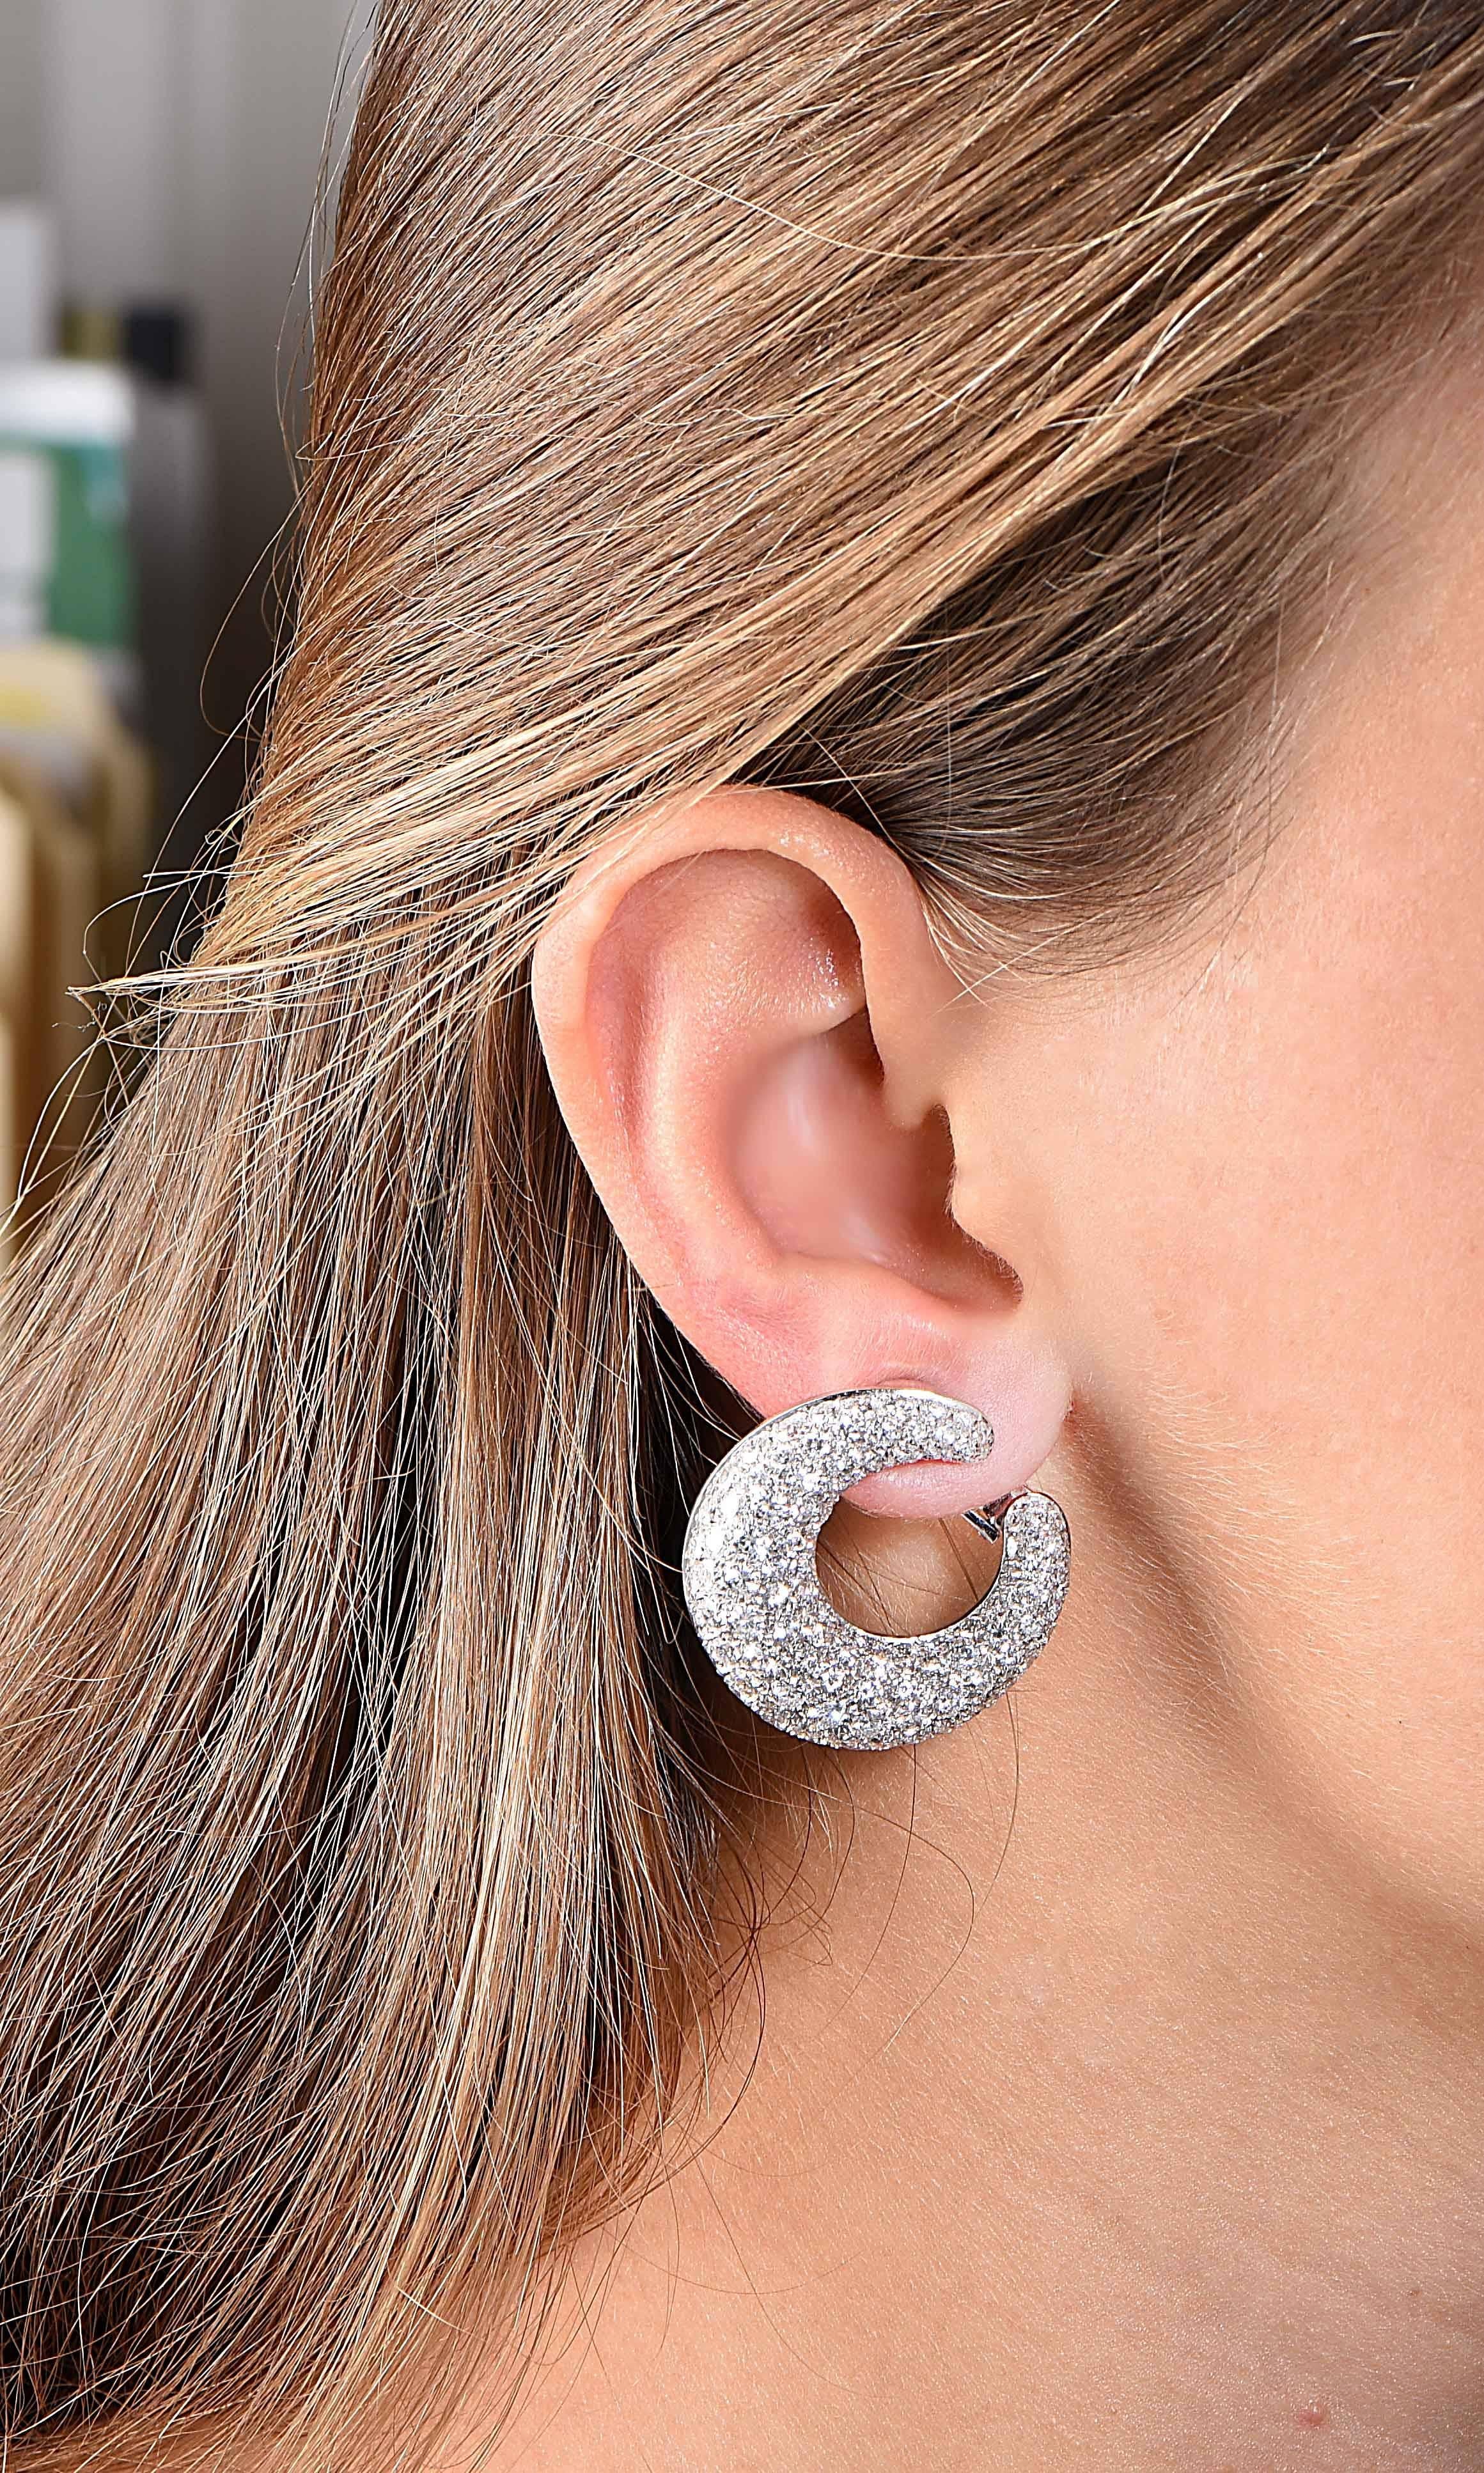 These lively bombe' crescent forms are pave set with 224 diamonds weighing approximately 13.5 carats E/F Color VS Clarity in total mounted in 18 Karat White Gold.

Metal Type: 18 Karat White Gold Tested and Stamped
Metal Weight: 20.8 Grams